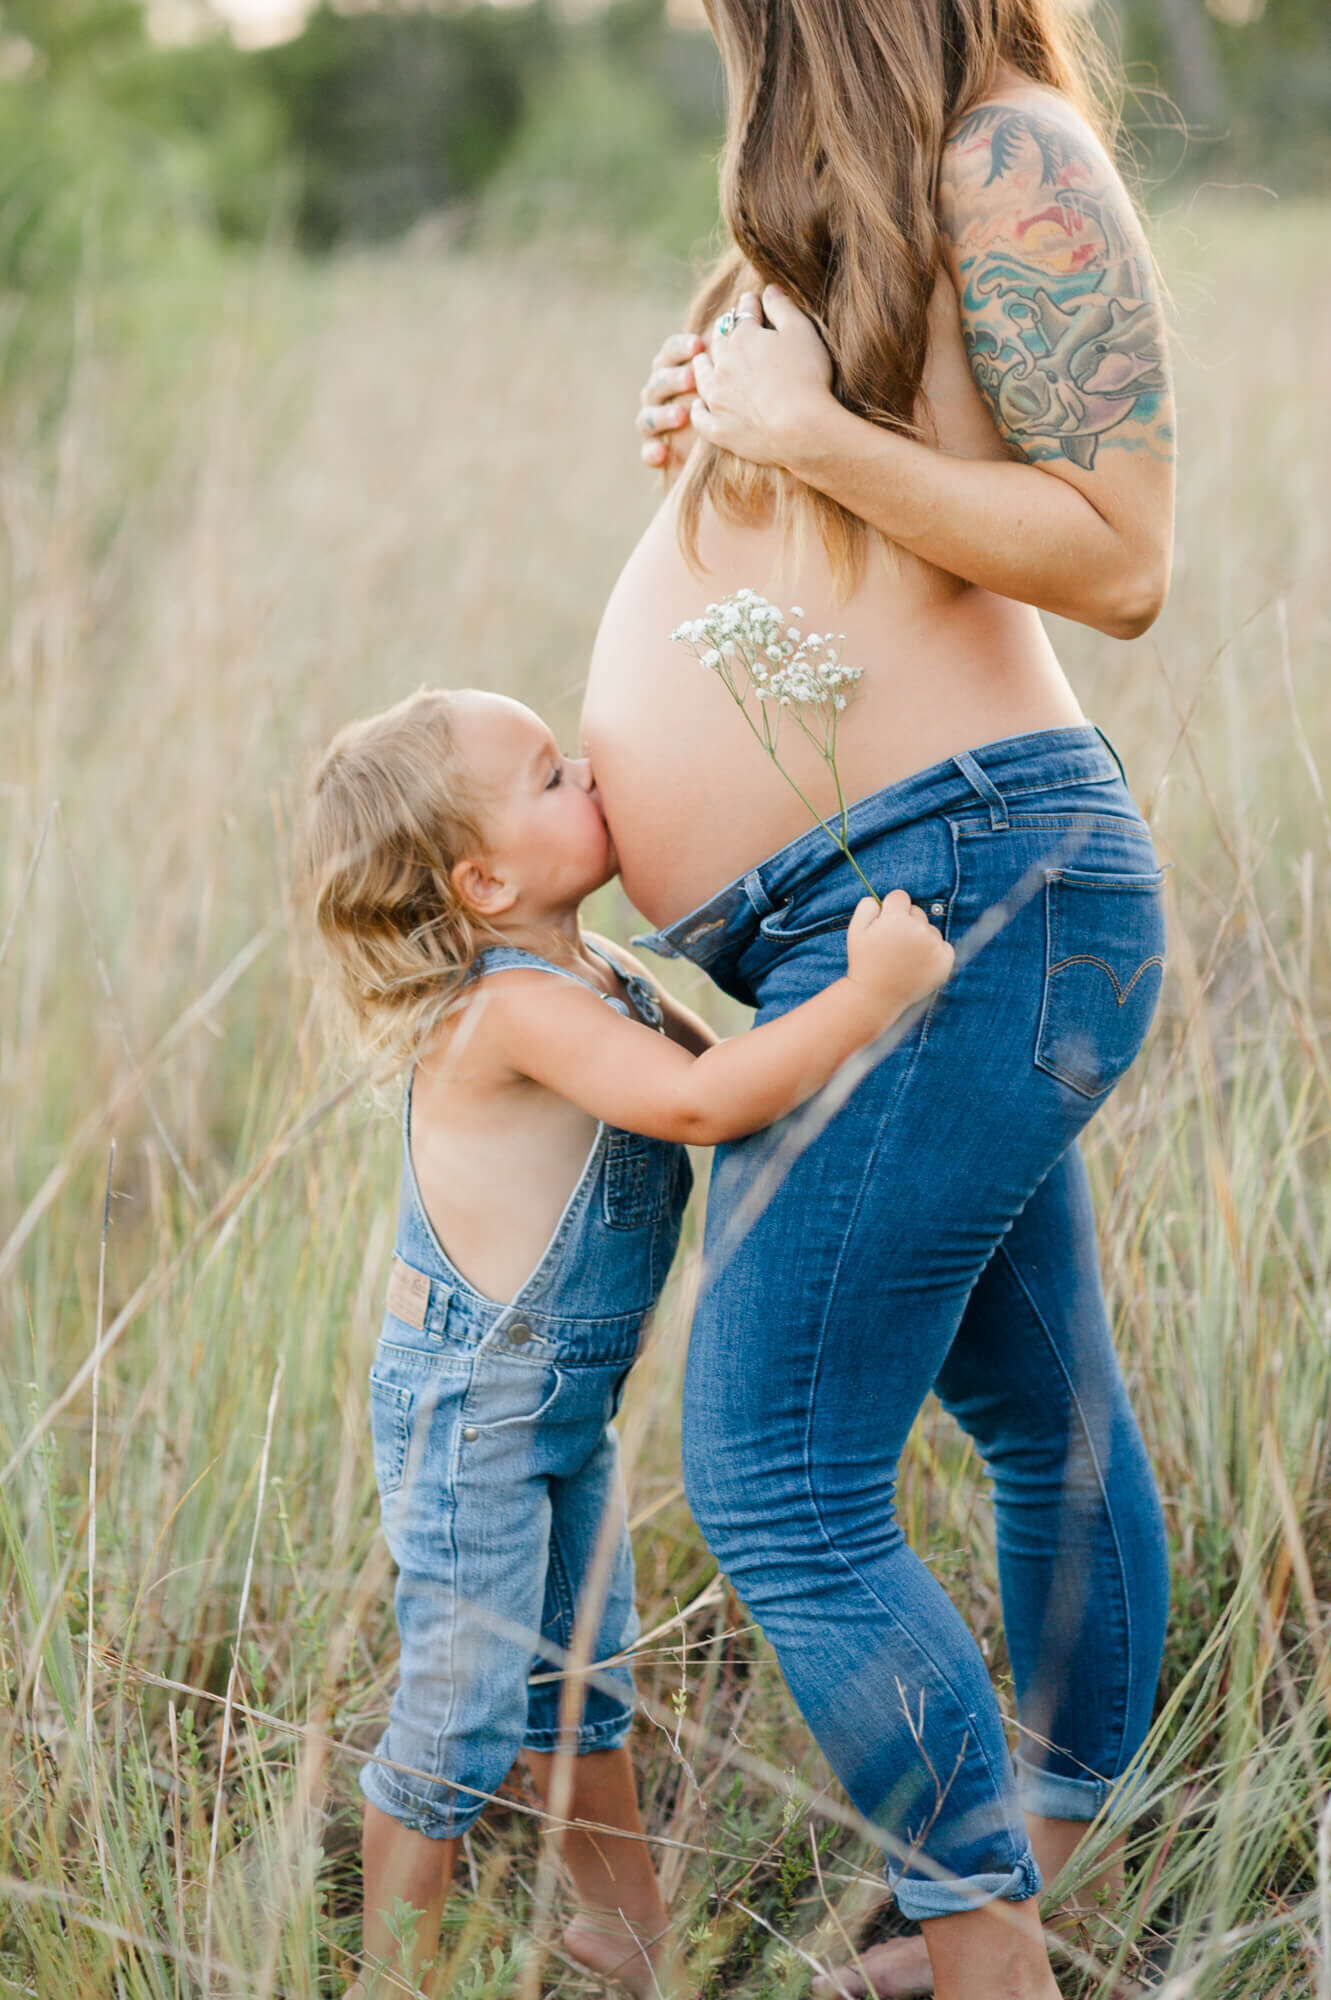 Pregnant mom stands topless in a tall grass field covering her breasts while her young daughter kisses her pregnant belly in jeans